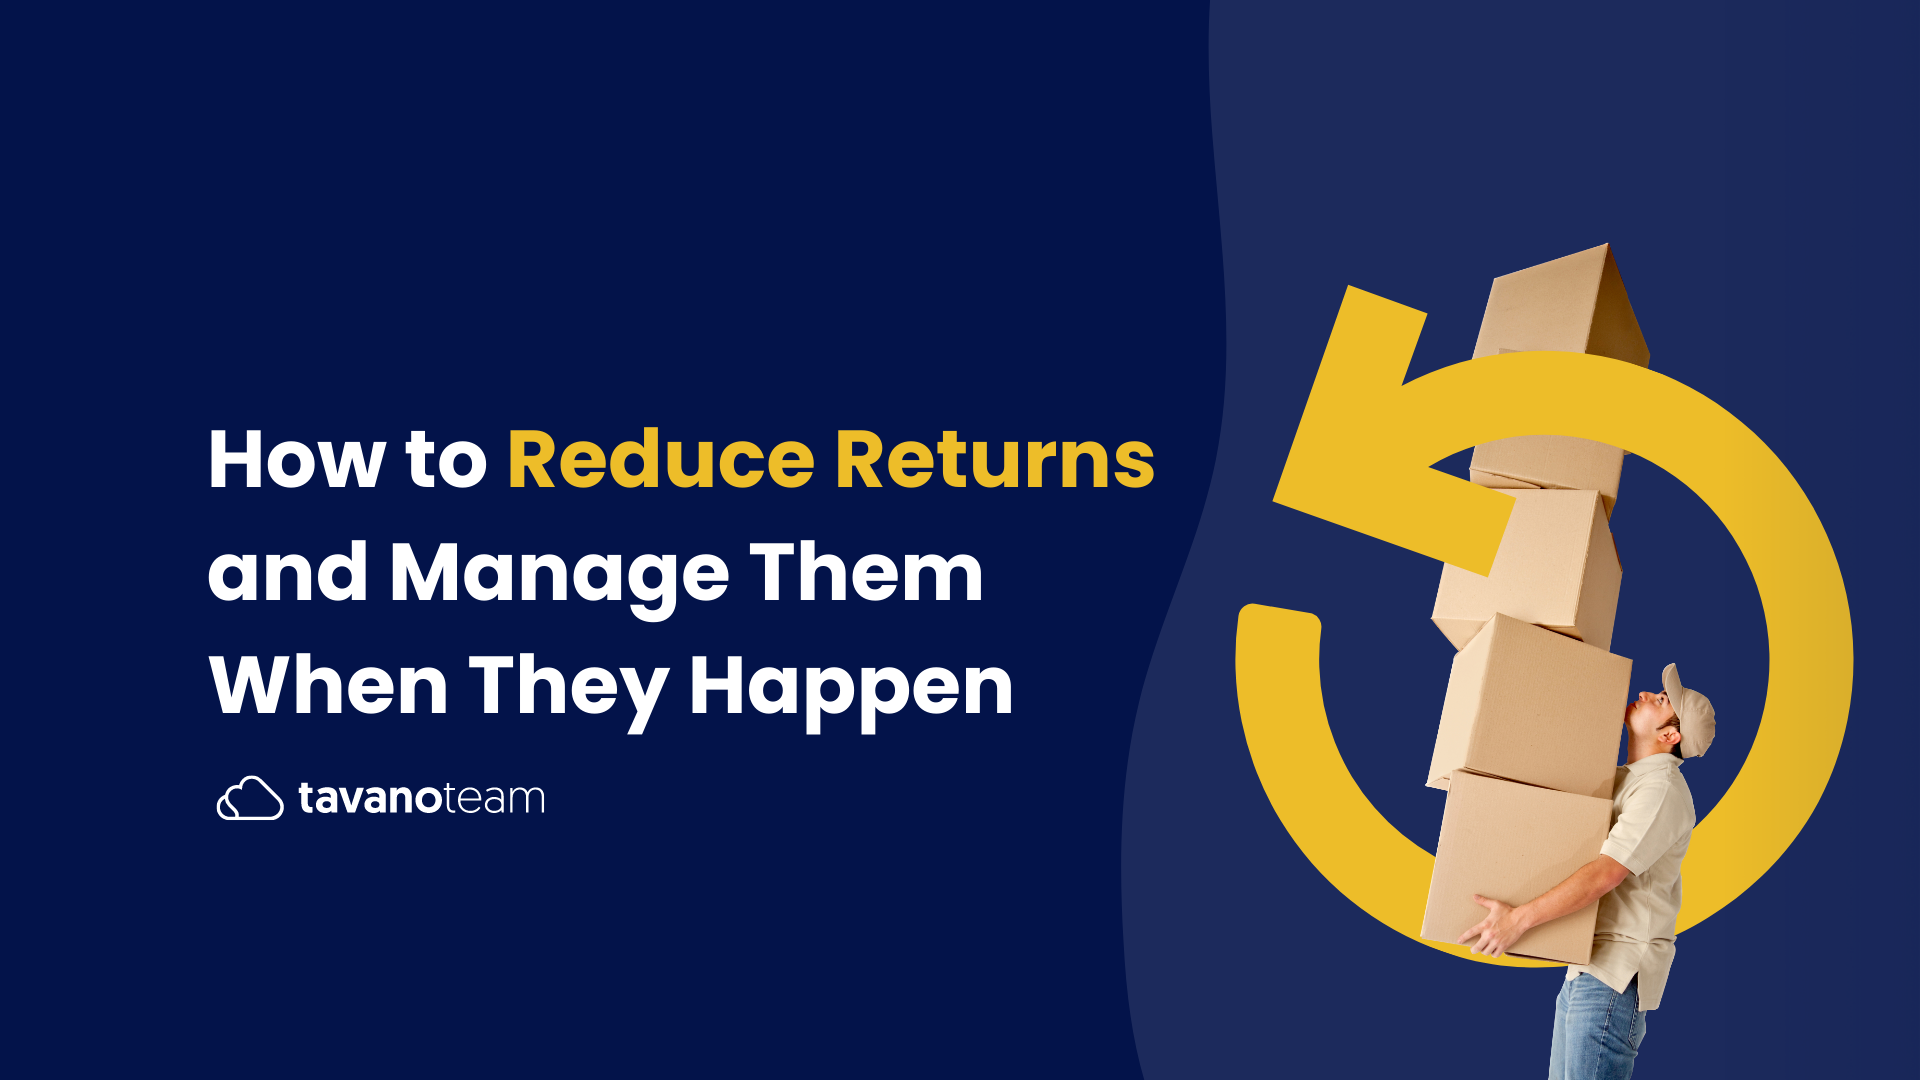 How-to-Reduce-Returns-and-Manage-Them-When-They-Happen